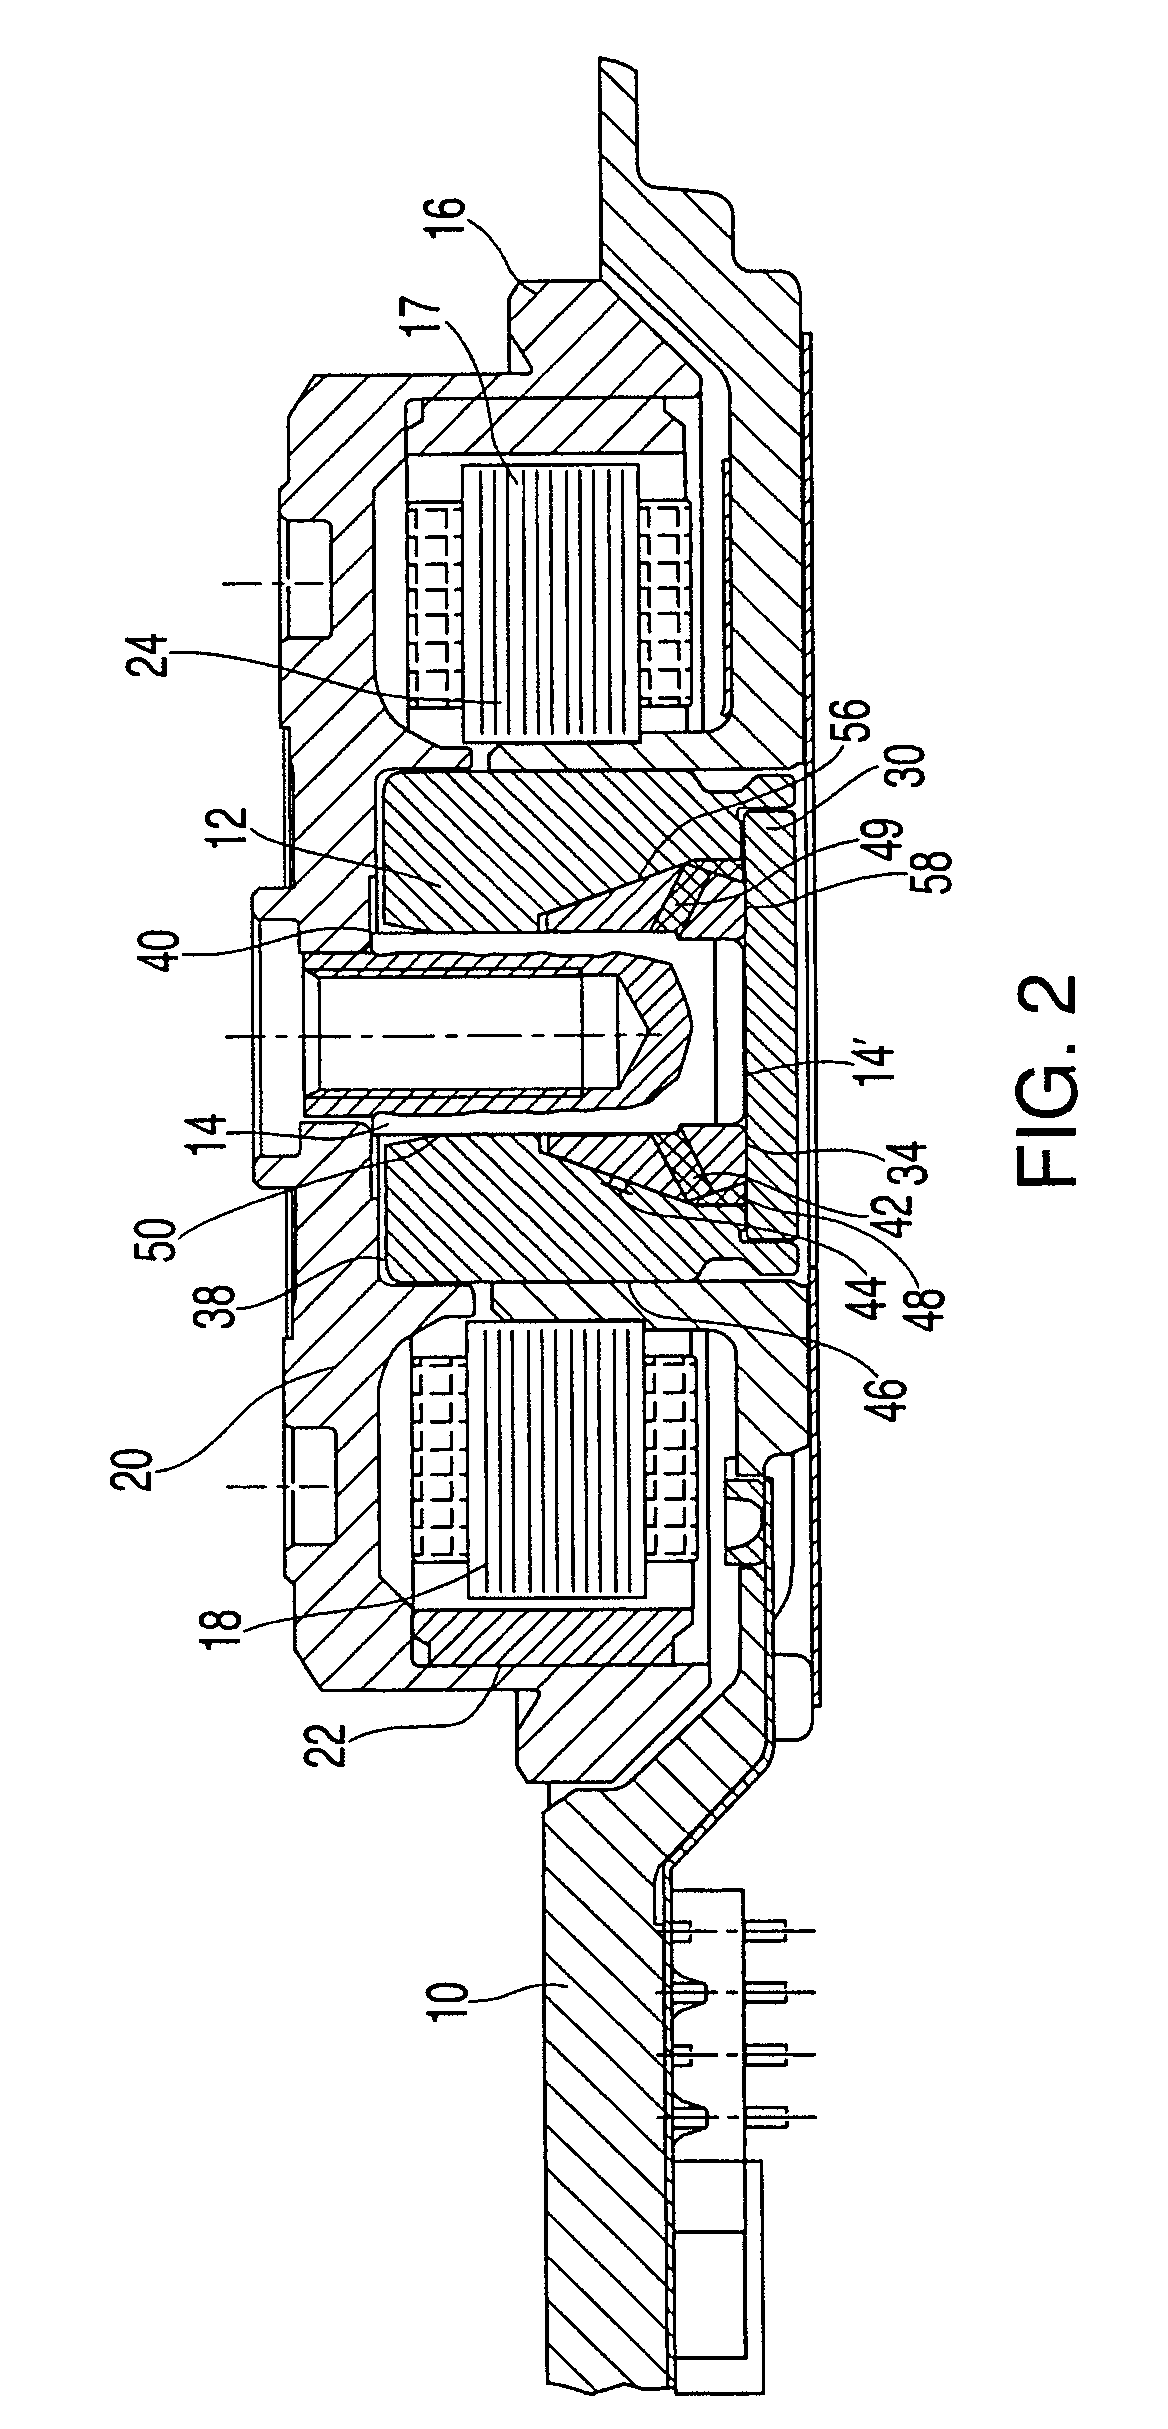 Hydrodynamic bearing for a spindle motor